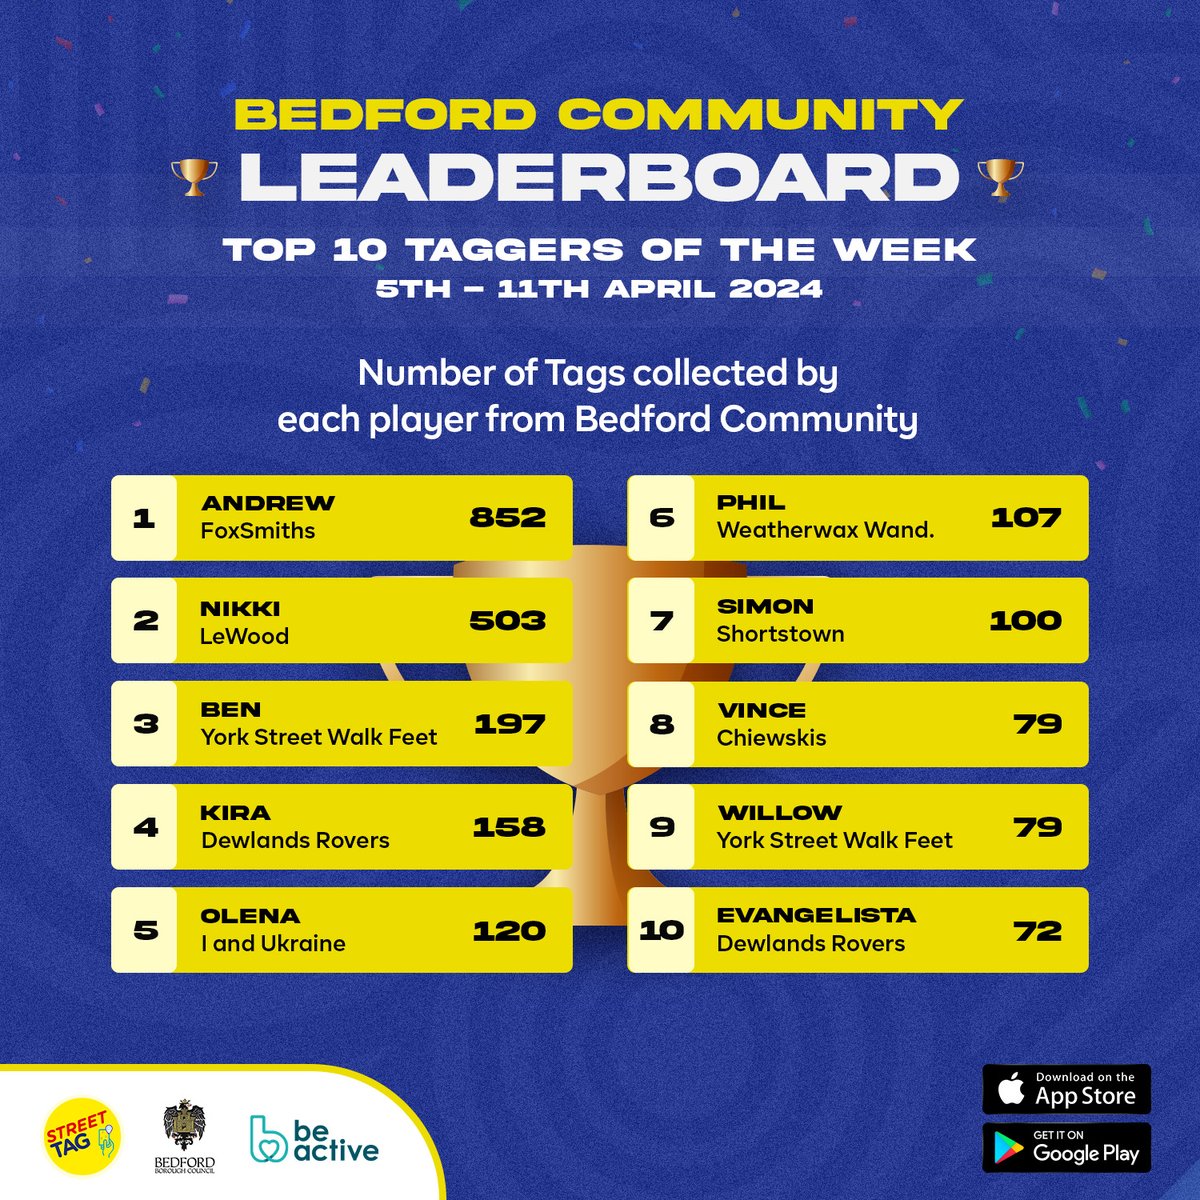 Andrew's challenging and back at the summit🎉 Nikki drops to 2nd; Ben, Kira & Olena rises. Congratulations to the Top 10 Taggers of the Week in Bedford Community on Street Tag! Keep up the Fan-TAG-stic work! 💪 @beactivebeds @BedfordTweets @StTagBedford